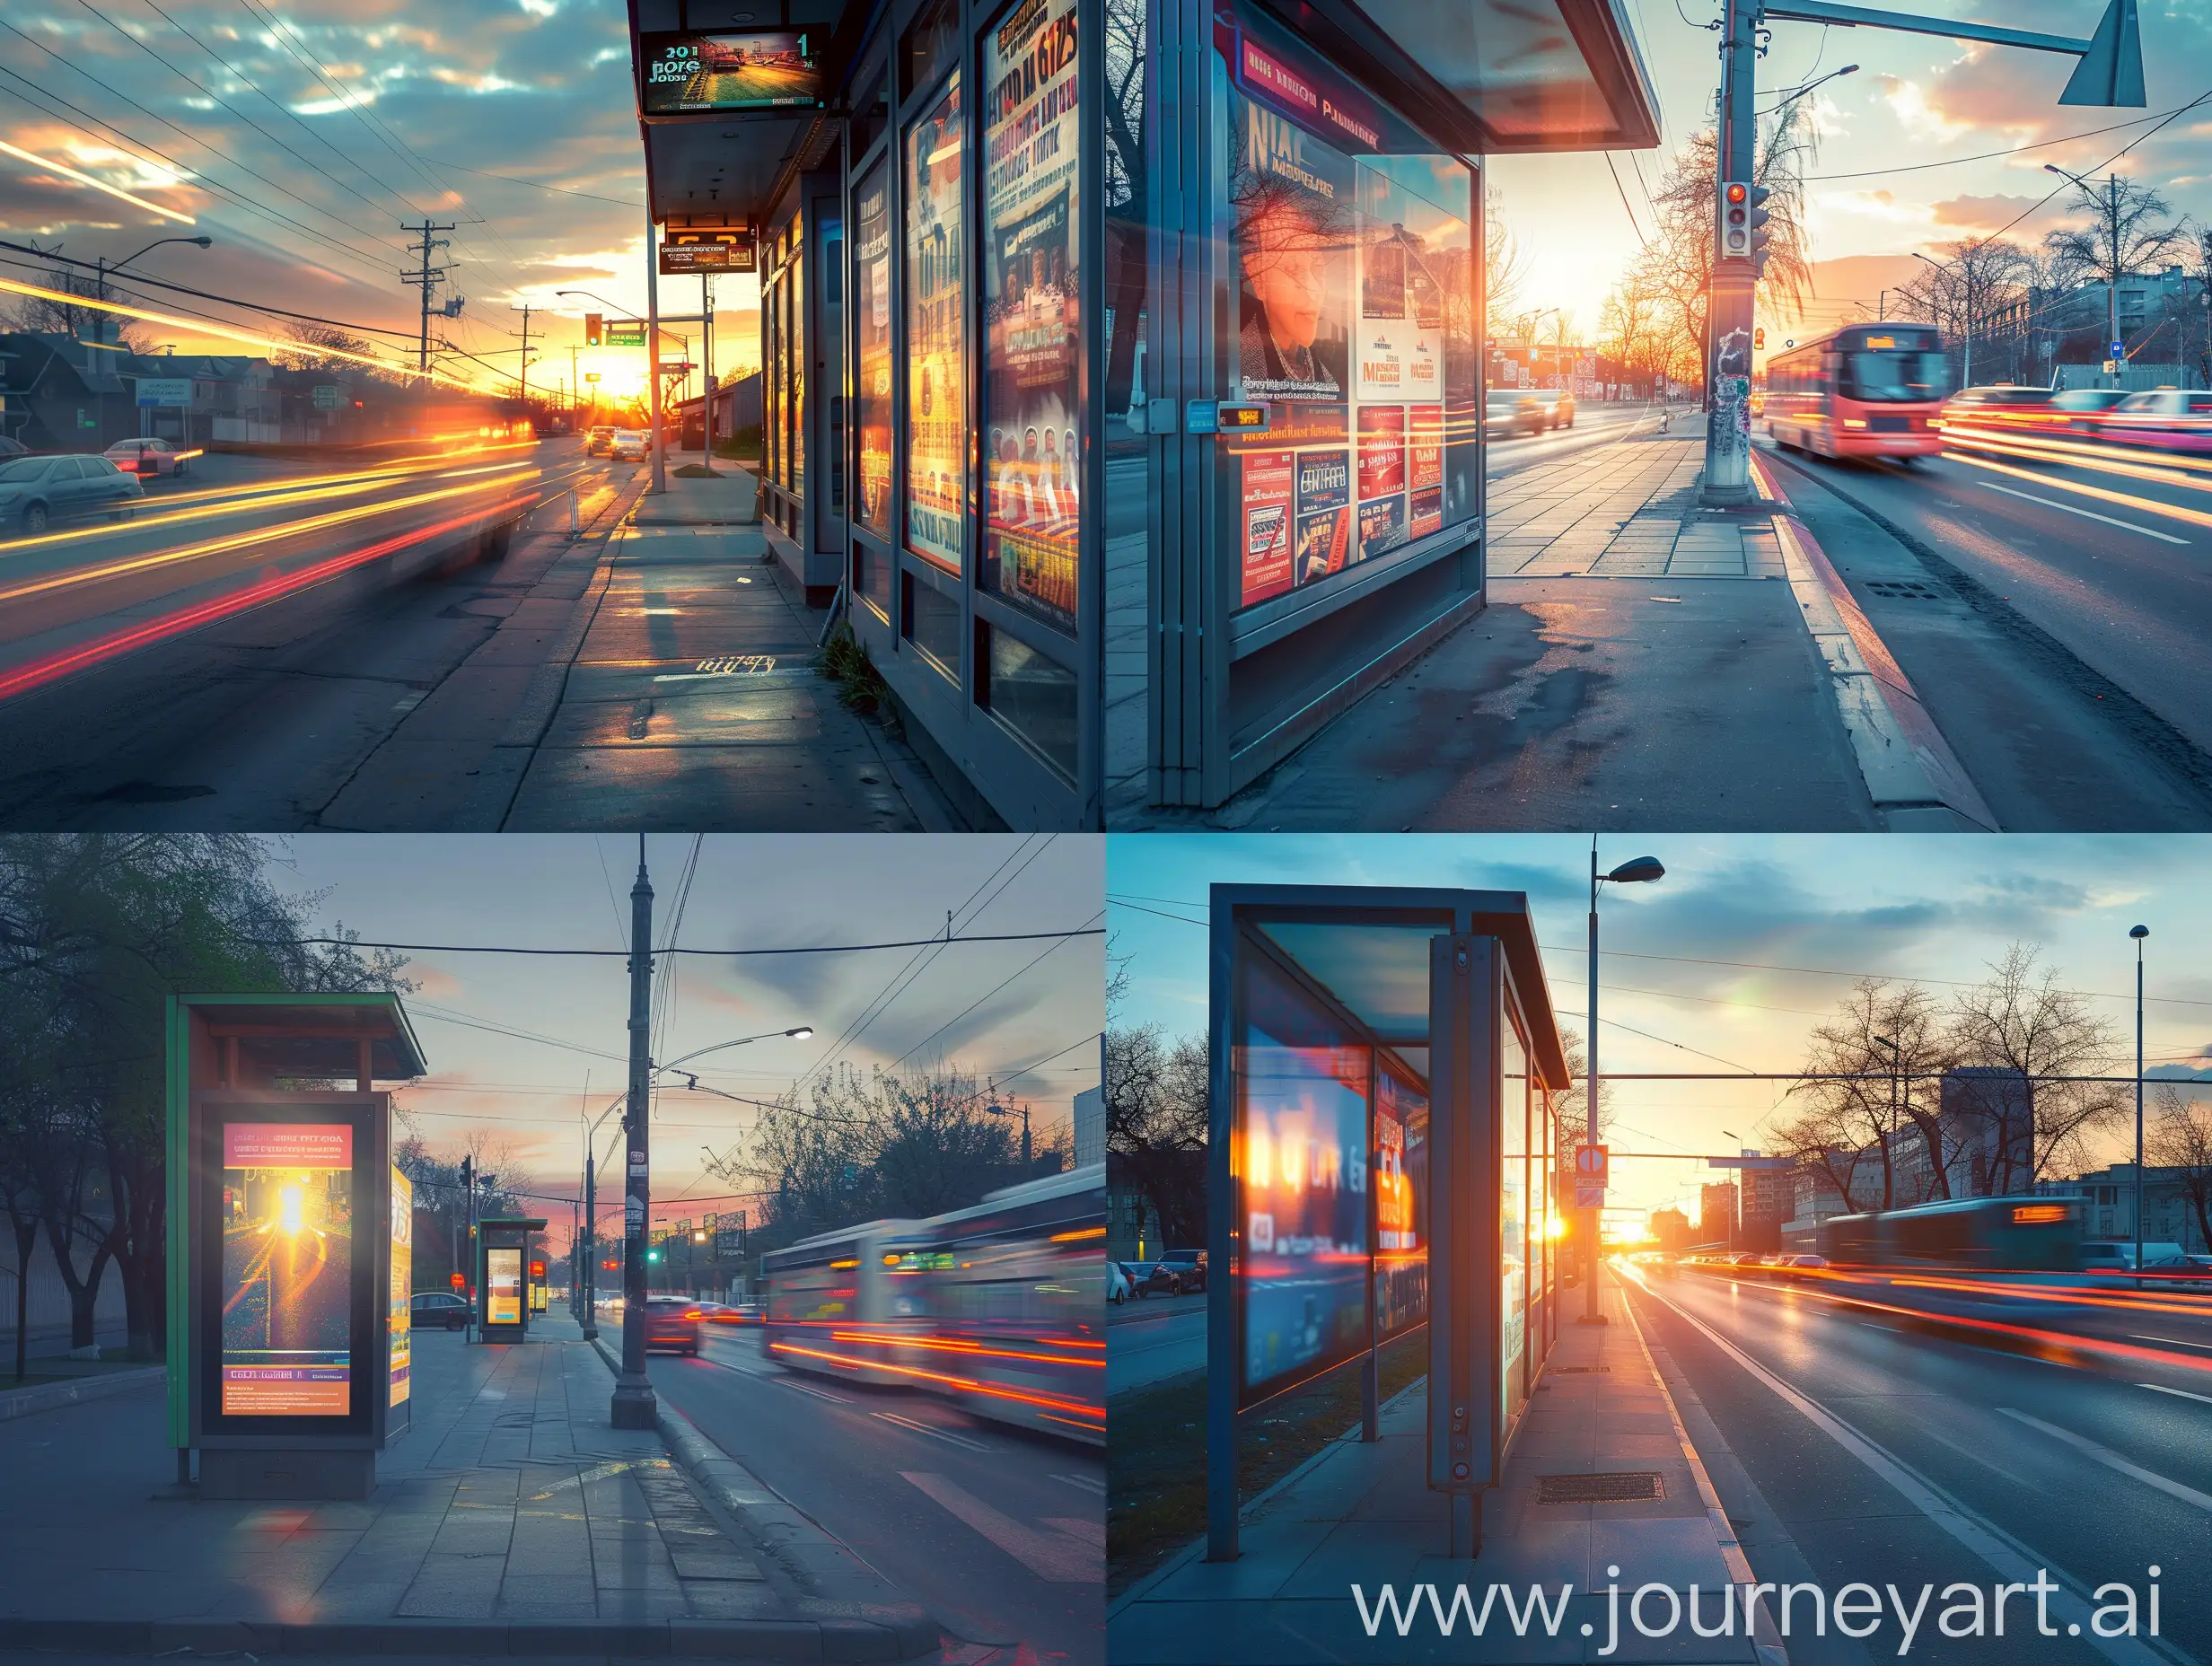 Vibrant-Street-Panel-Ads-Illuminated-by-Passing-Cars-at-Sunset